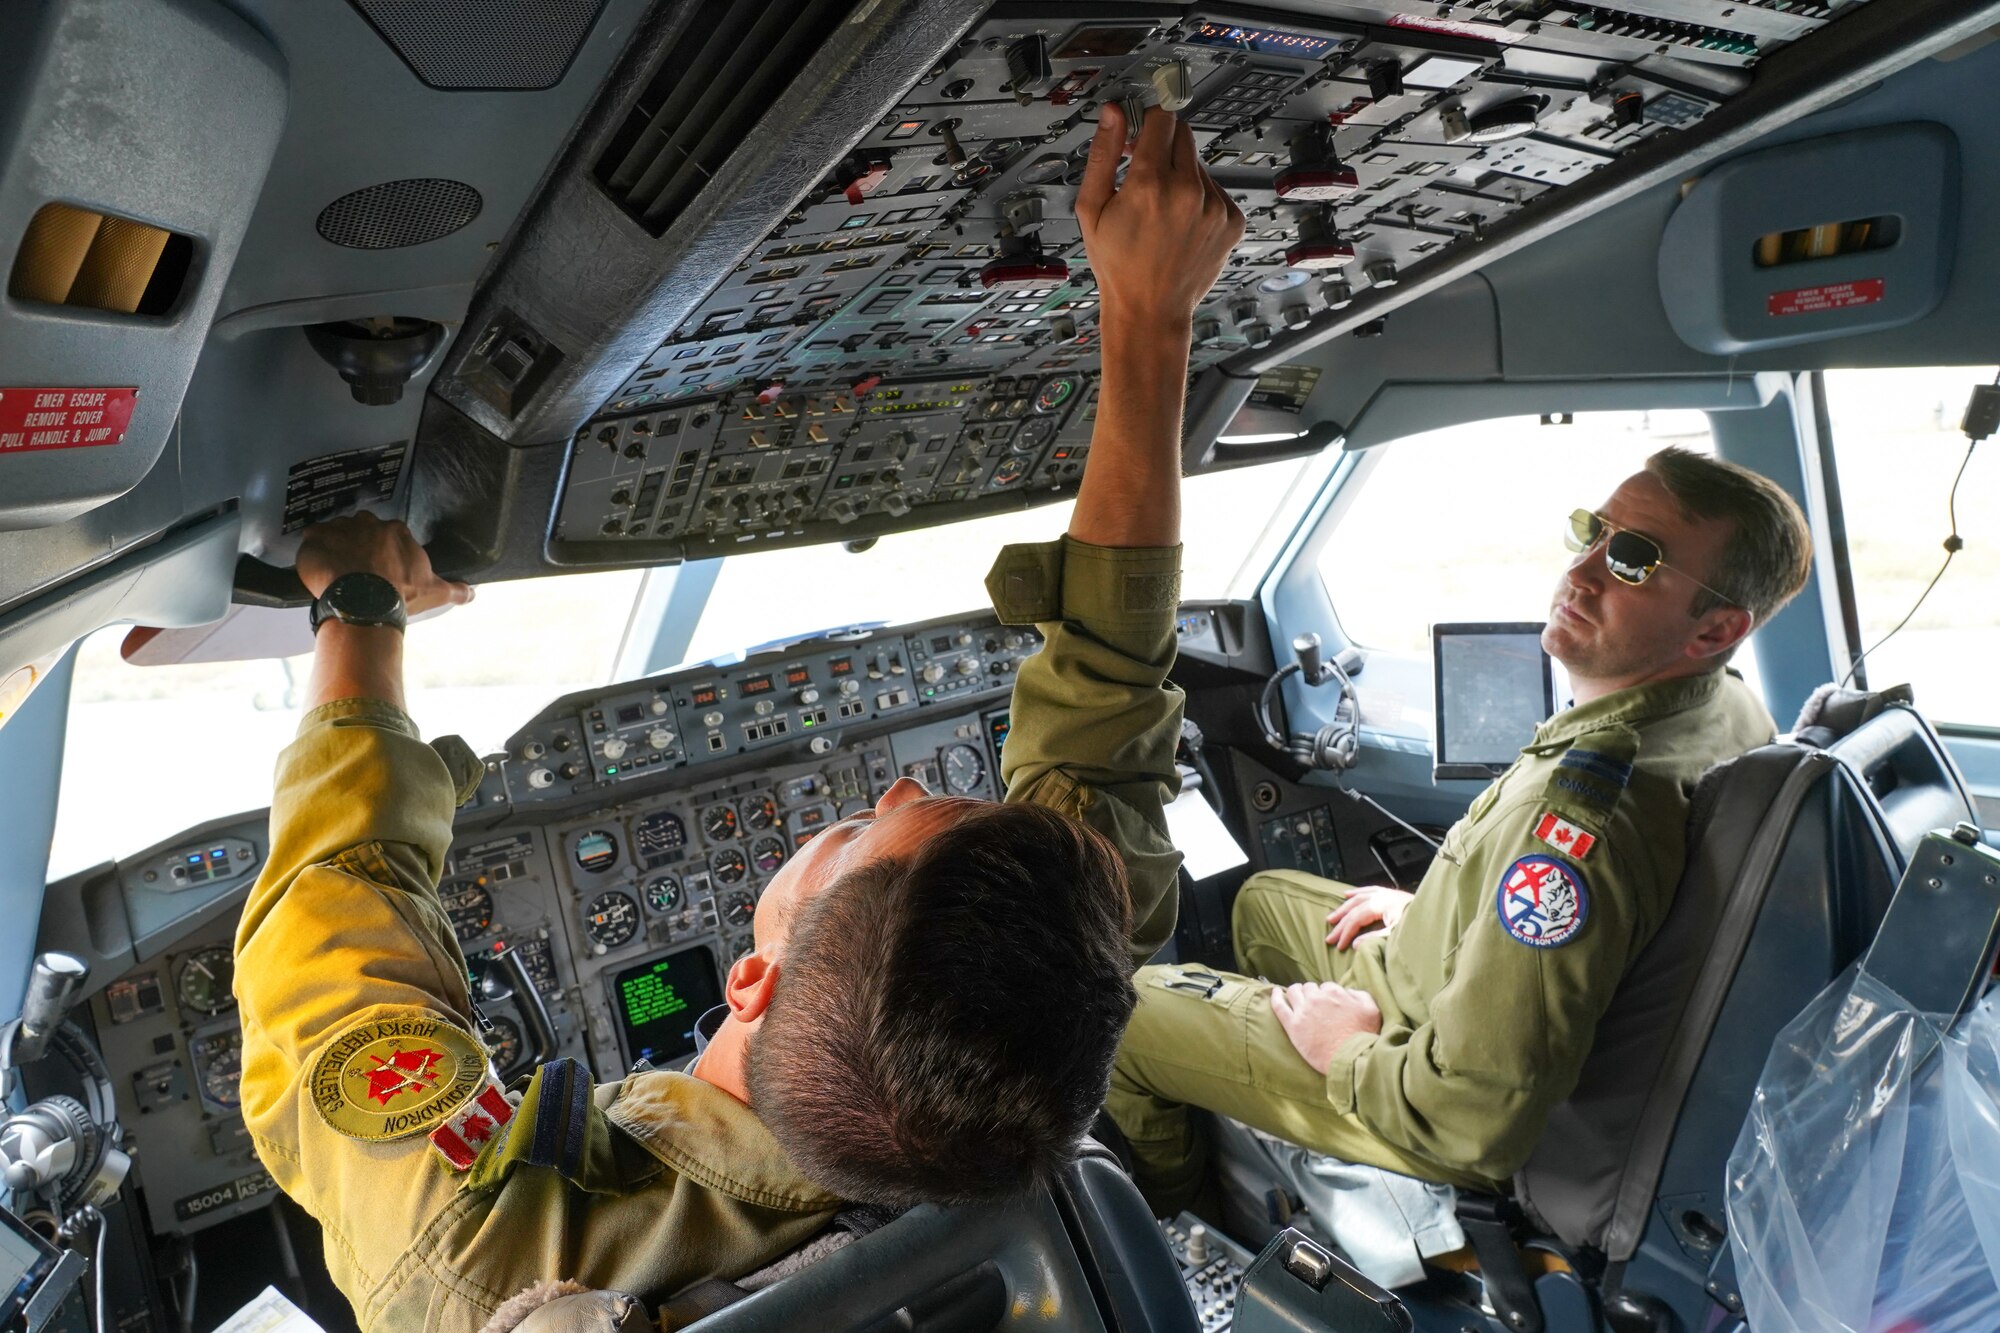 Royal Canadian Air Force pilots Capt. Russ Baker, left, and Capt. Andrew Williams, both assigned to the 437th Transport Squadron based out of Canadian Forces Base Trenton, Canada, perform pre-flight checks before refueling operations in training airspace over Alaska during the Red Flag-Alaska 19-3 exercise, Aug. 15, 2019. Red Flag-Alaska, a series of Pacific Air Forces commander-directed field training exercises for U.S. forces, provides joint offensive counter-air, interdiction, close air support, and large force employment training in a simulated combat environment.